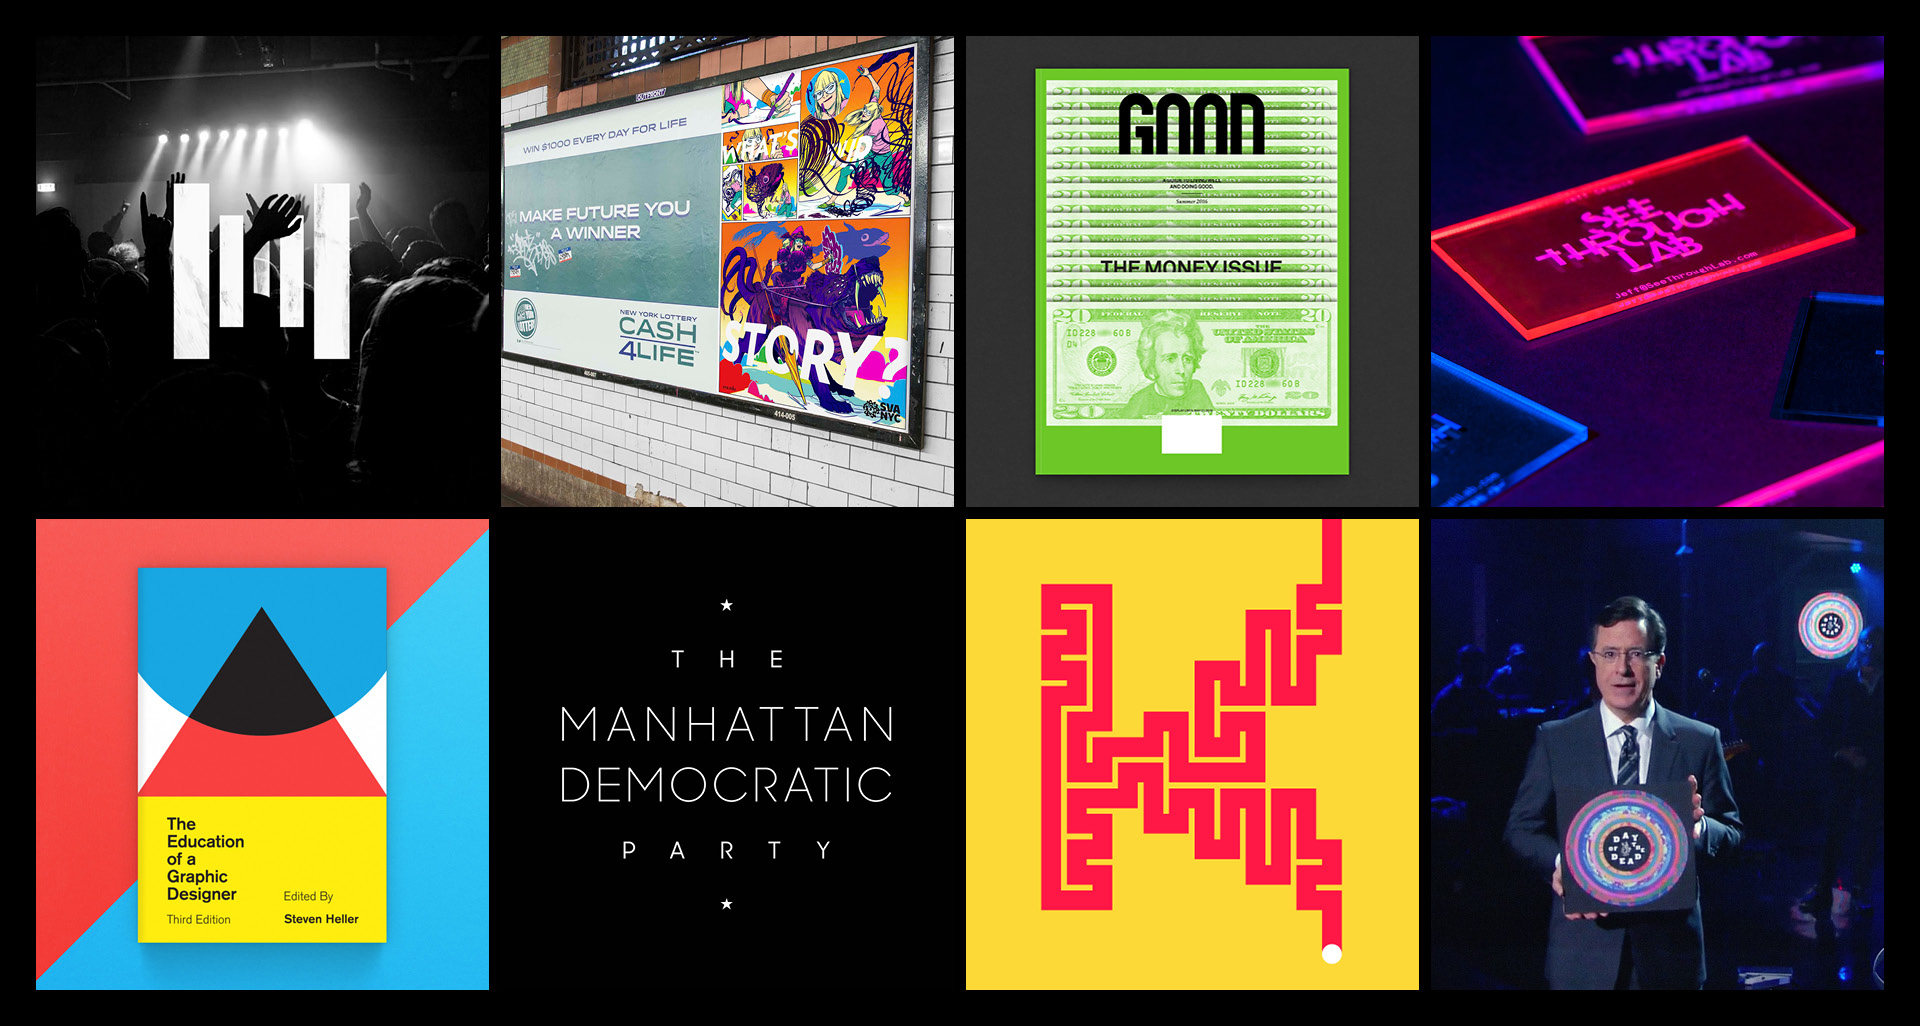 A set of colorful images representing text logos, magazine covers, and other generated objects.